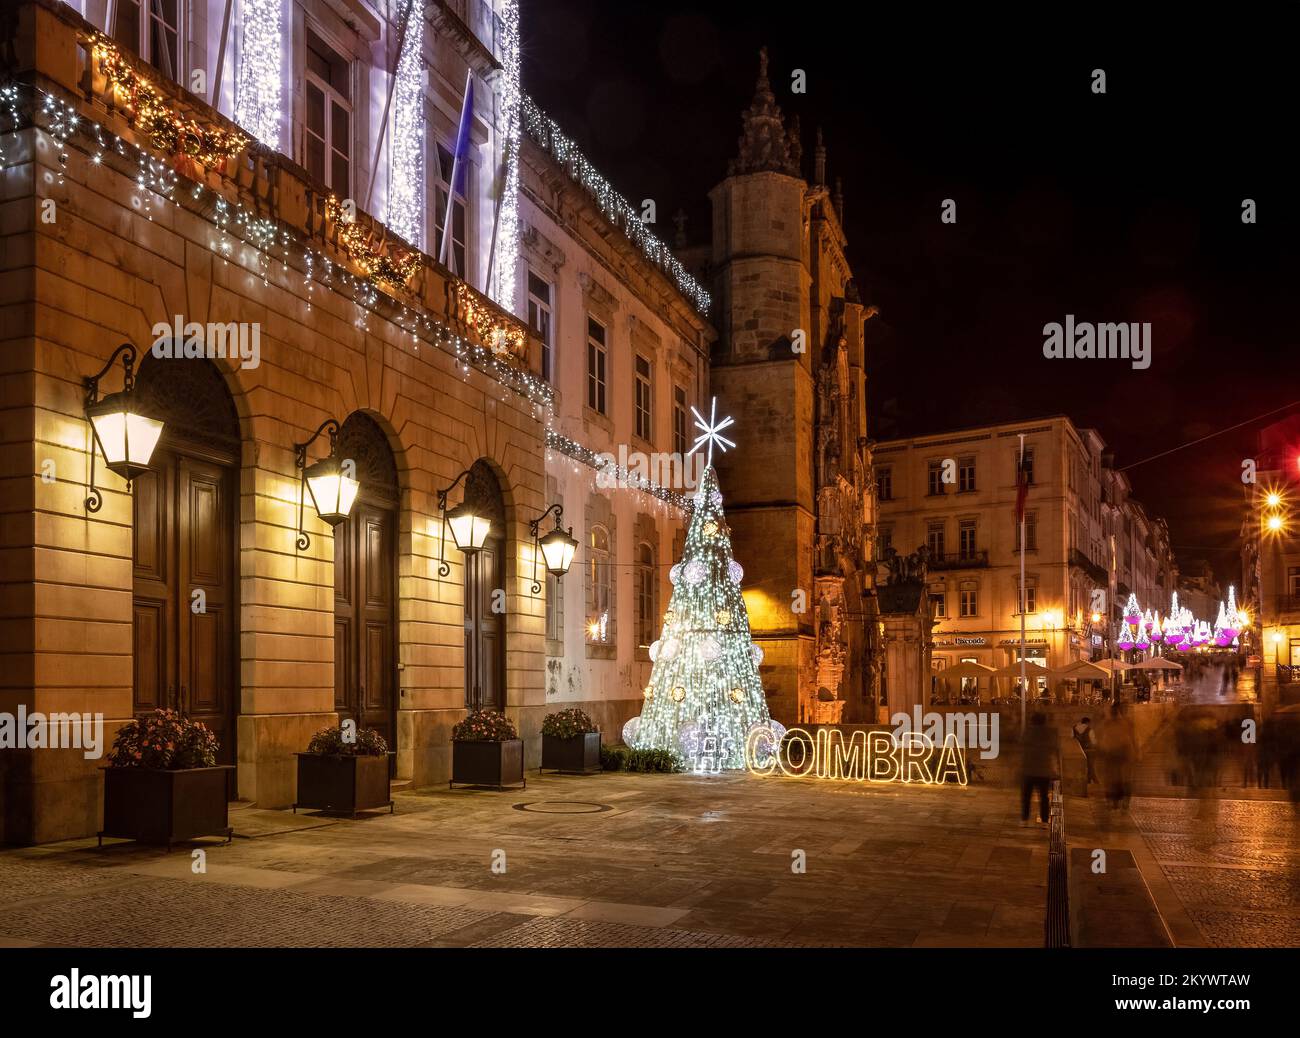 Coimbra, Portugal - December 1, 2022: Christmas lights in Coimbra, Portugal, with a Christmas tree in front of the City Hall and Santa Cruz church in Stock Photo